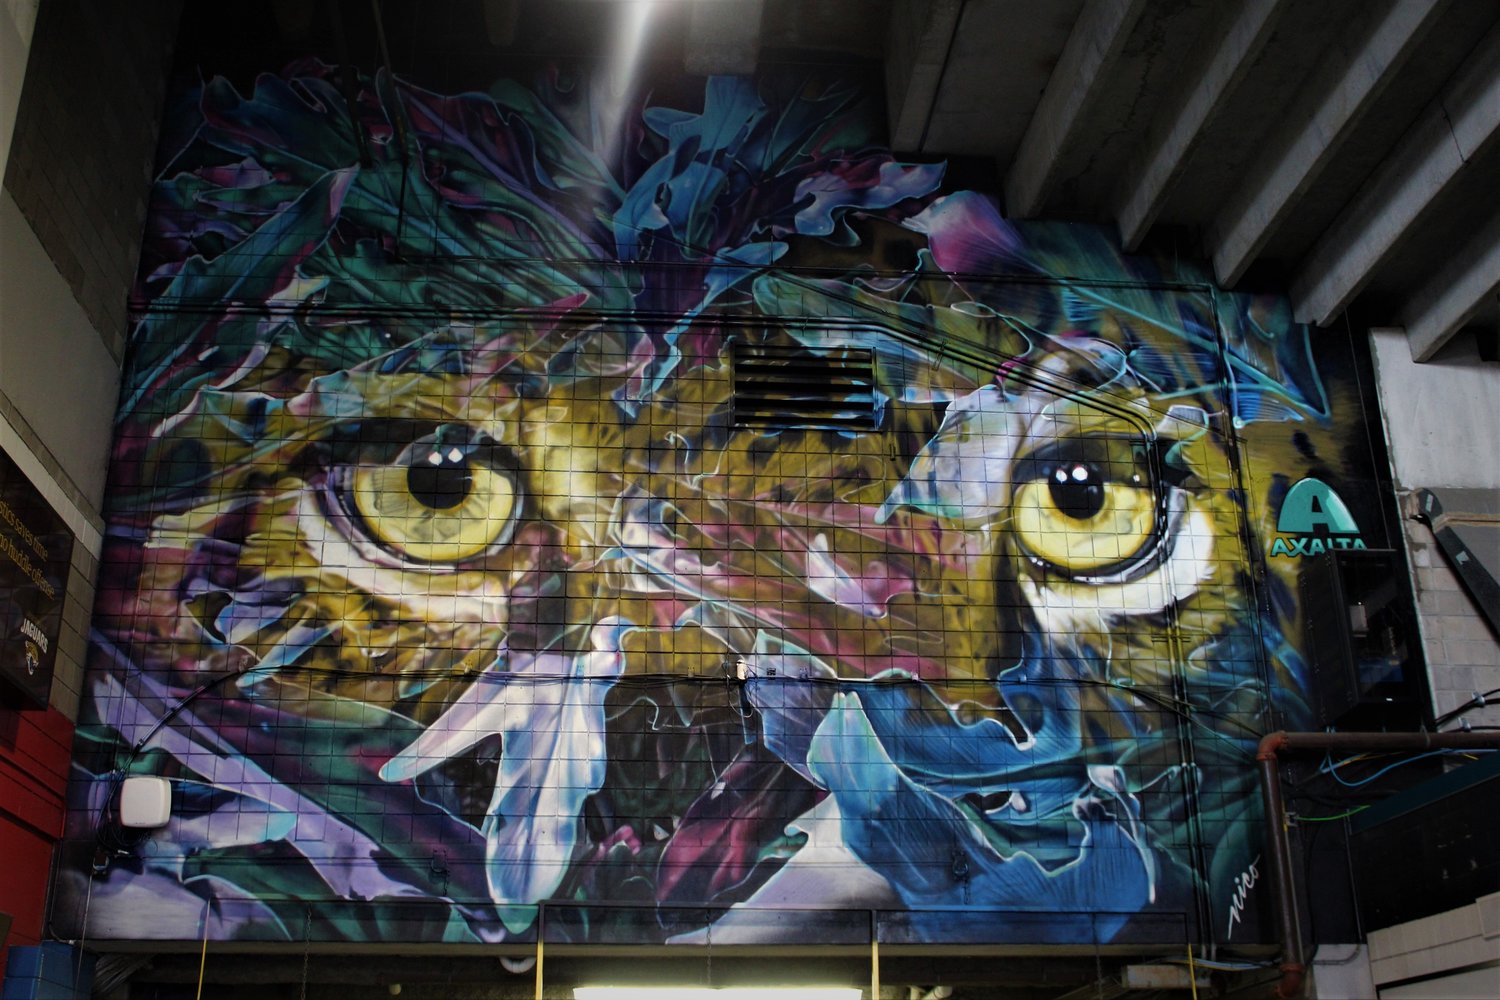 It took nine days for Nicole “Nico” Holderbaum and her assistant to complete the new Jacksonville Jaguars mural for the 2019 season.